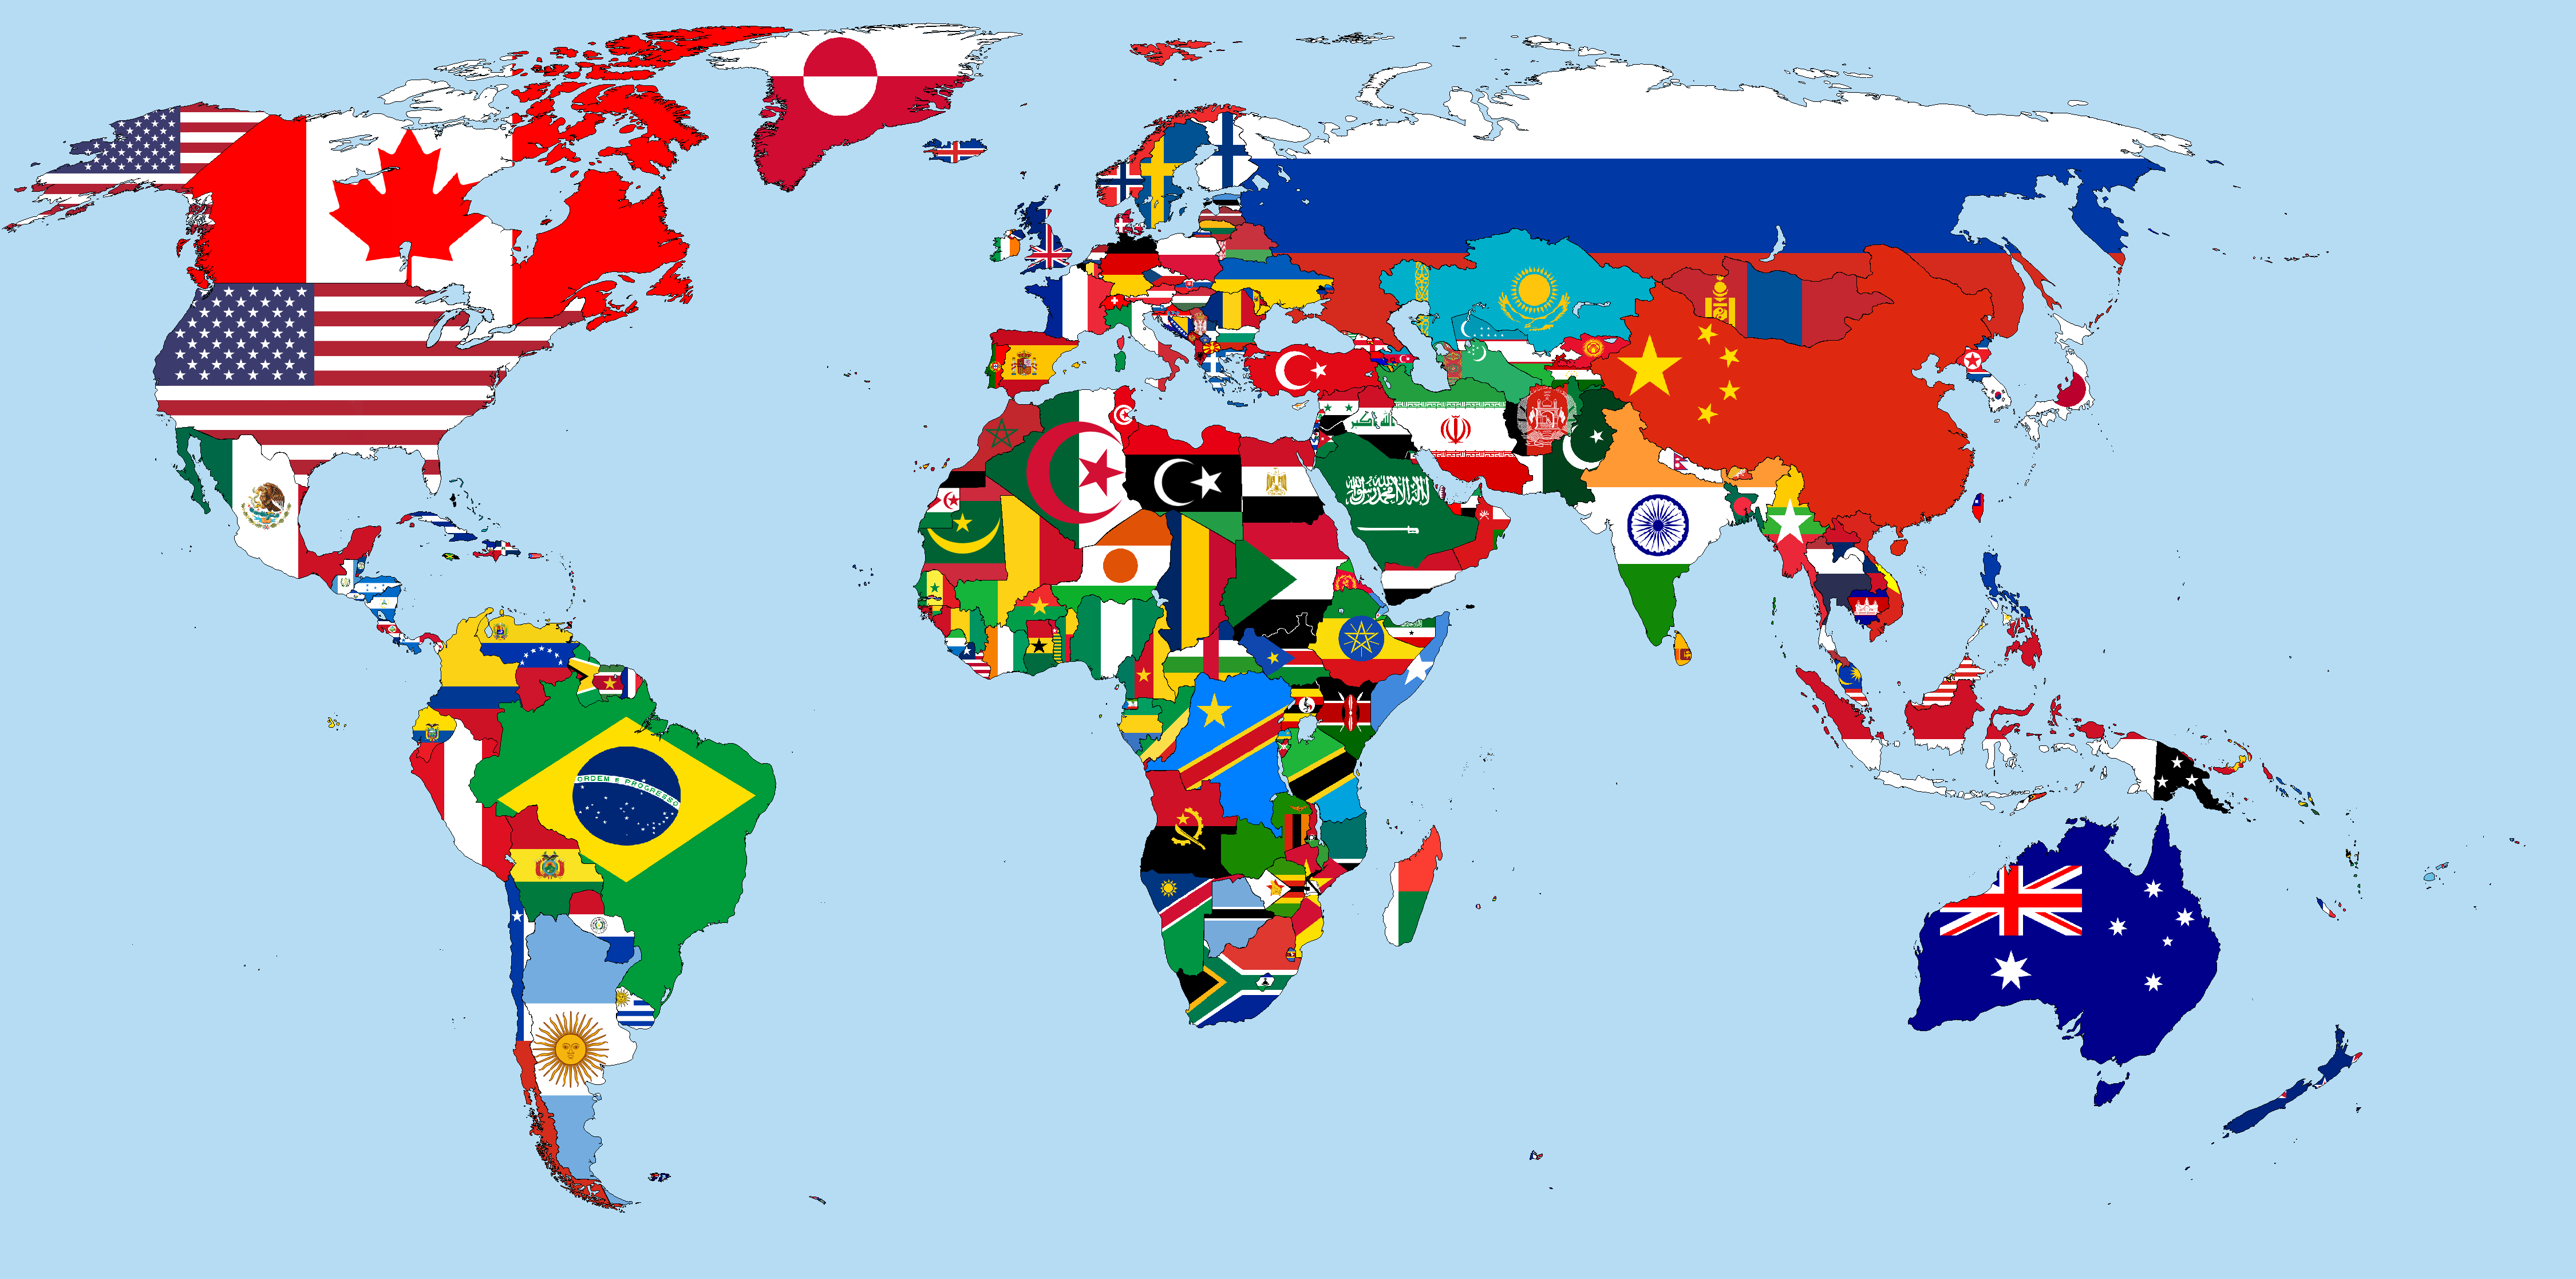 File:Flag-map of the world (2017).png - Wikipedia